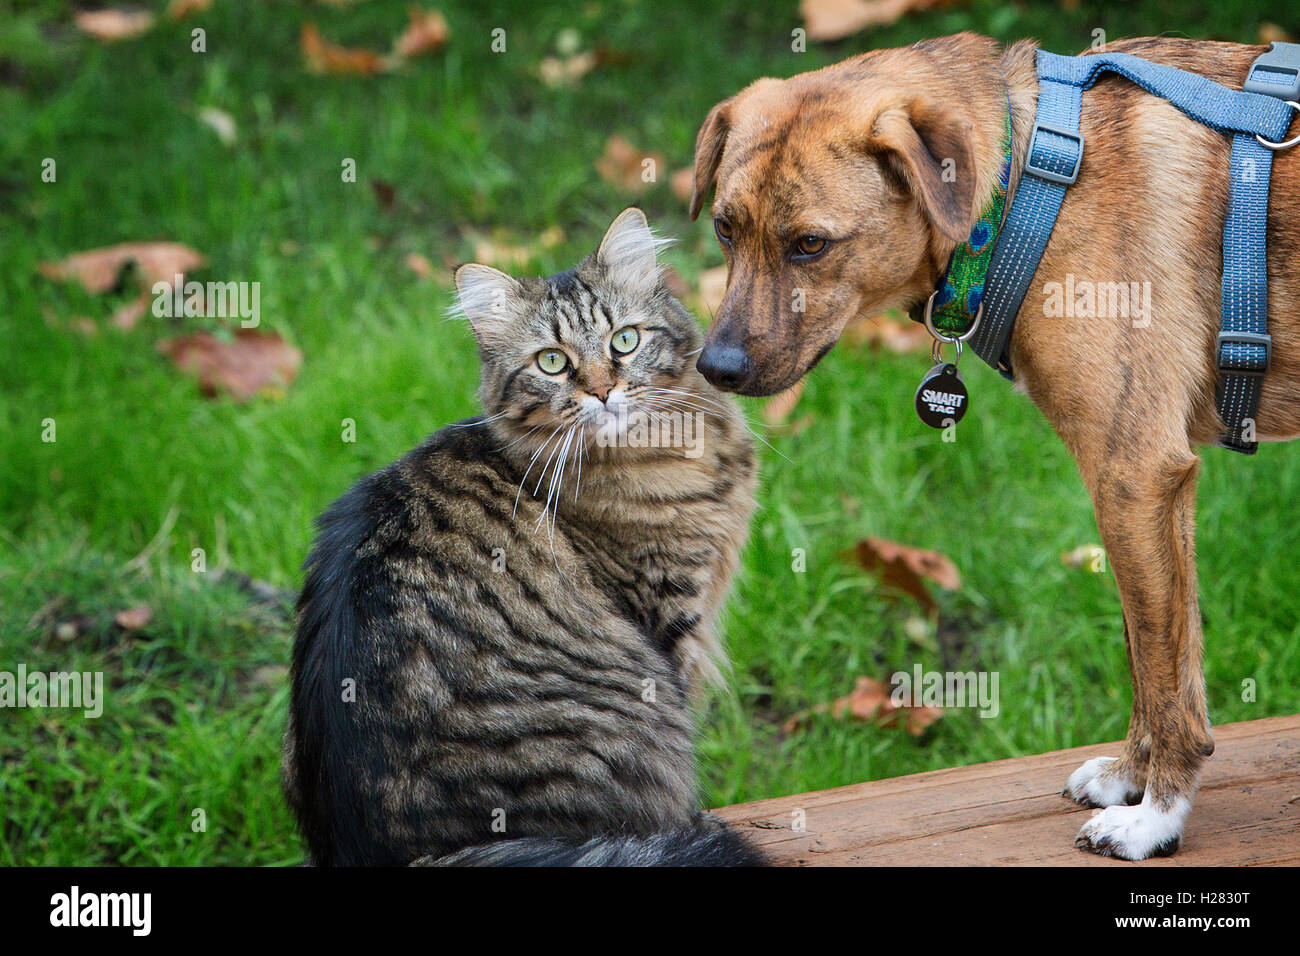 dog looking at cat with green eyes Stock Photo